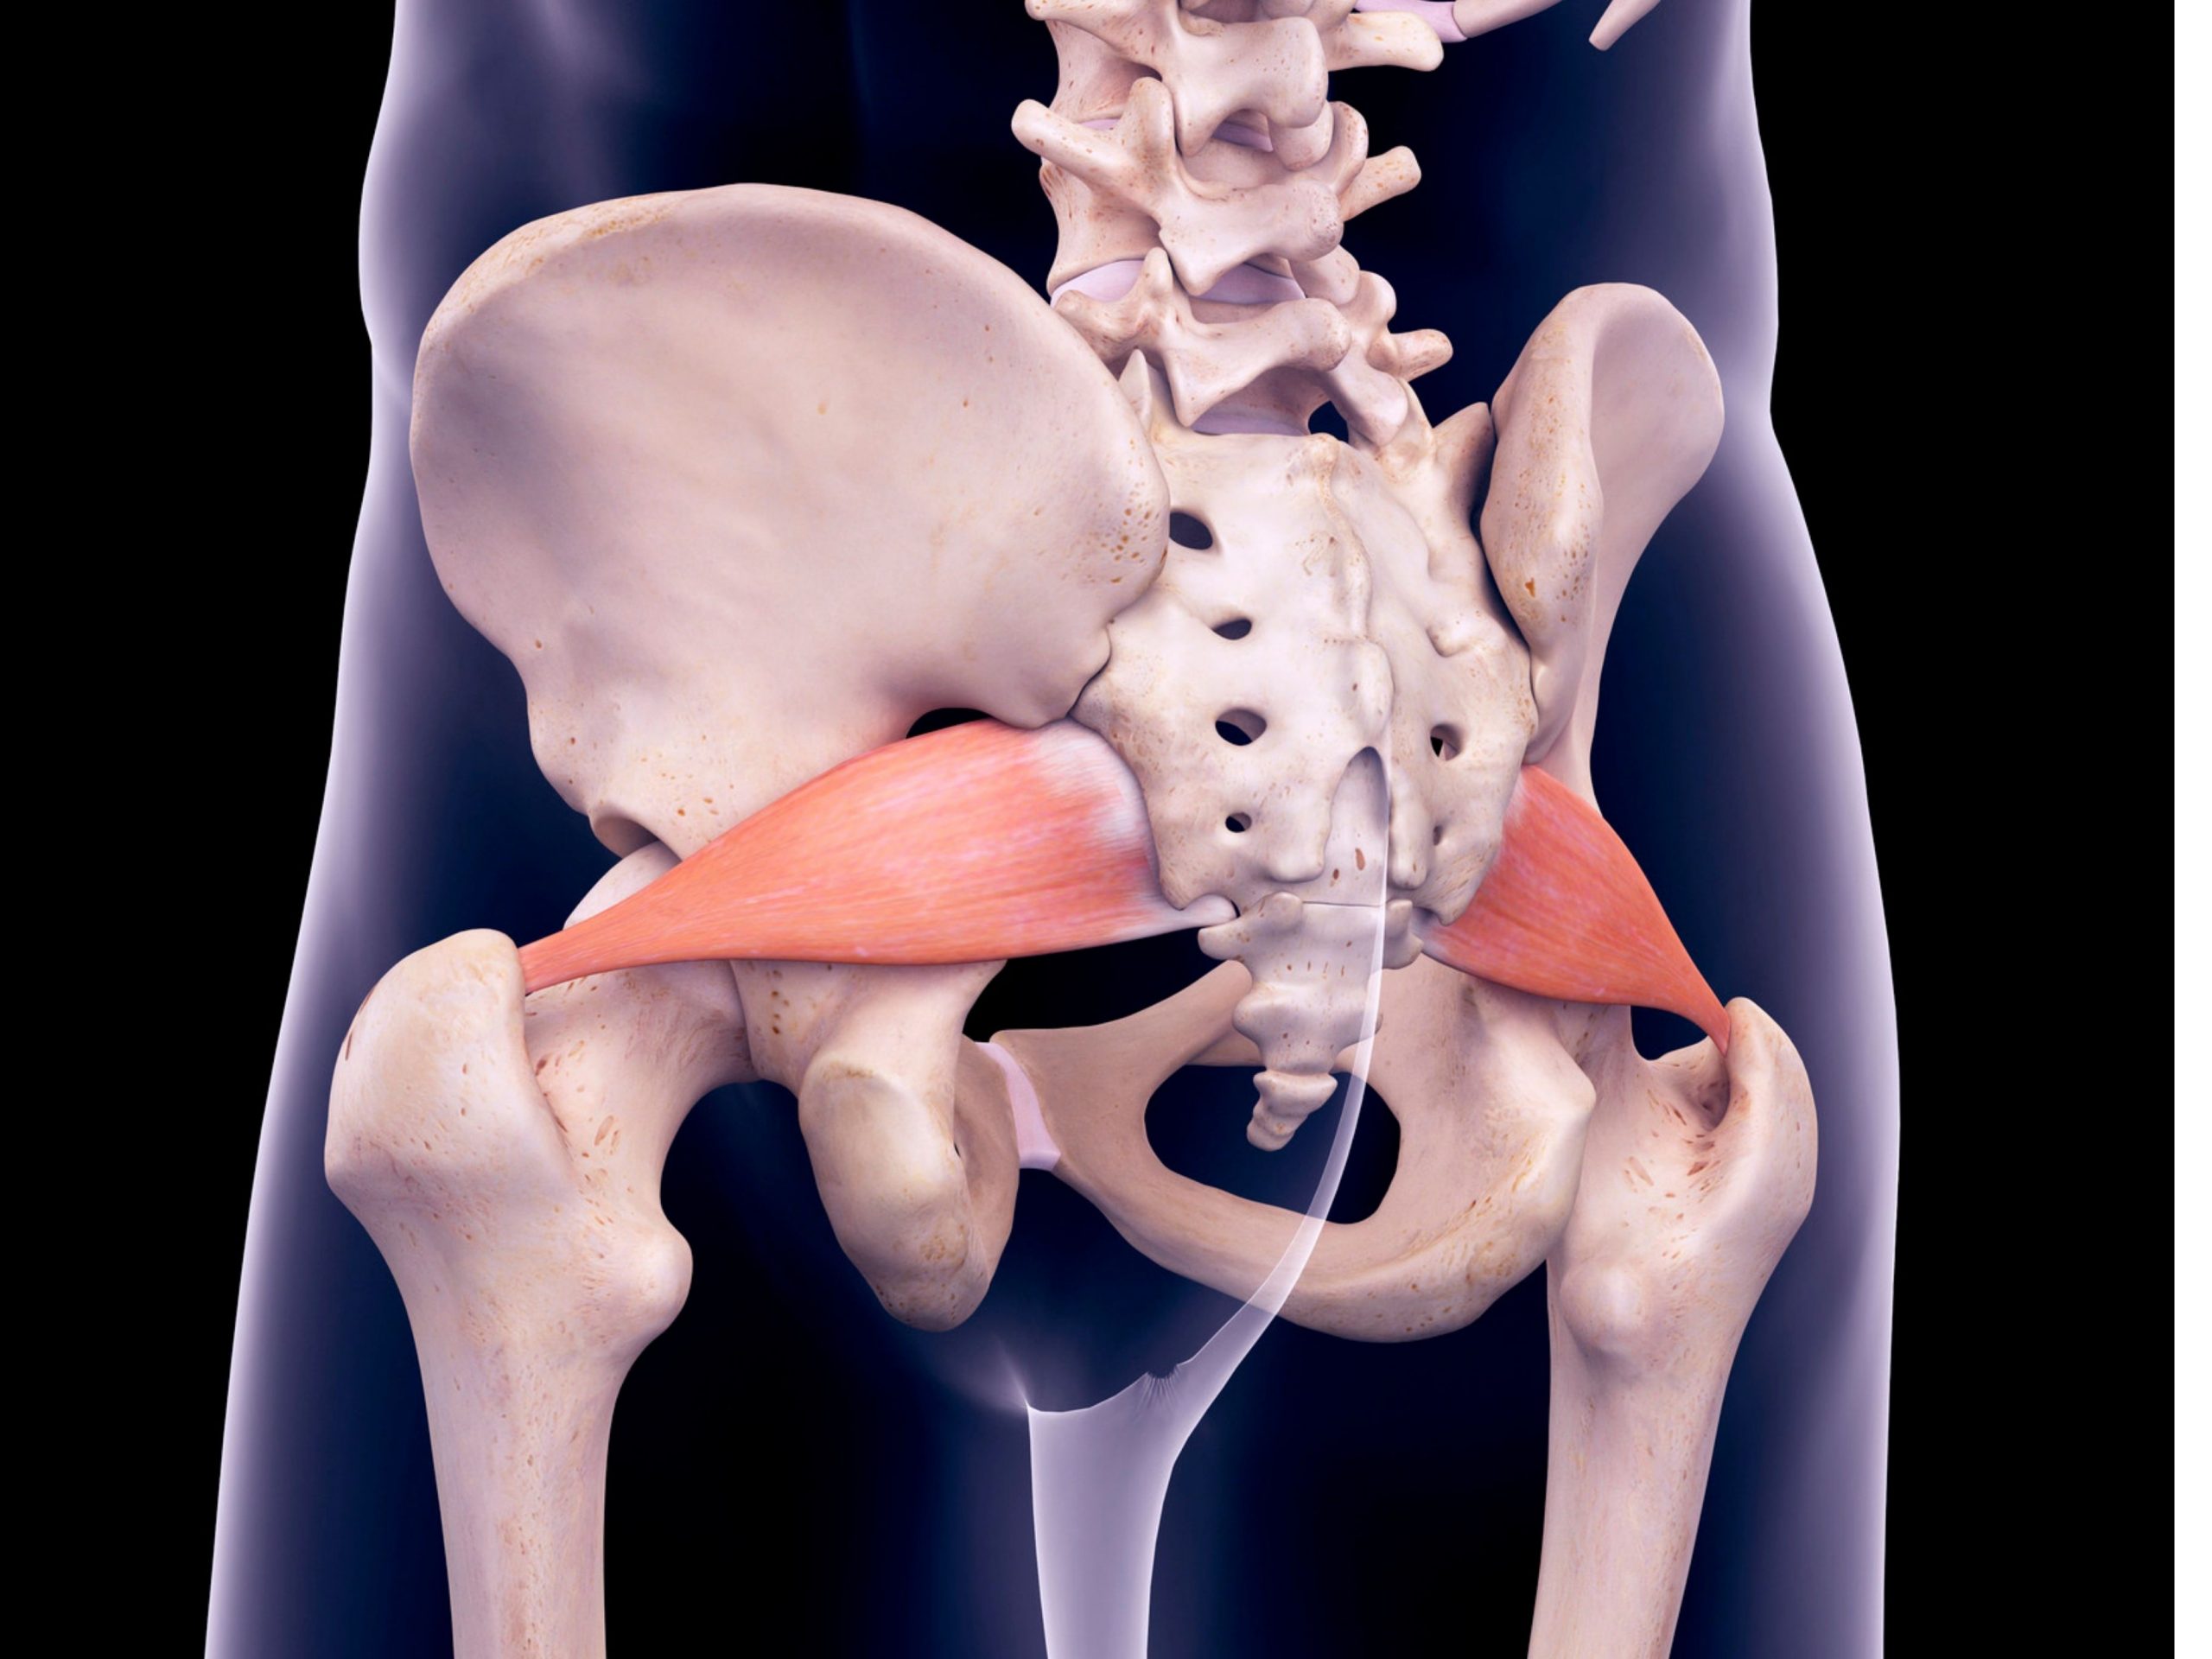 Piriformis Syndrome My MSK Clinic Burnley Manchester